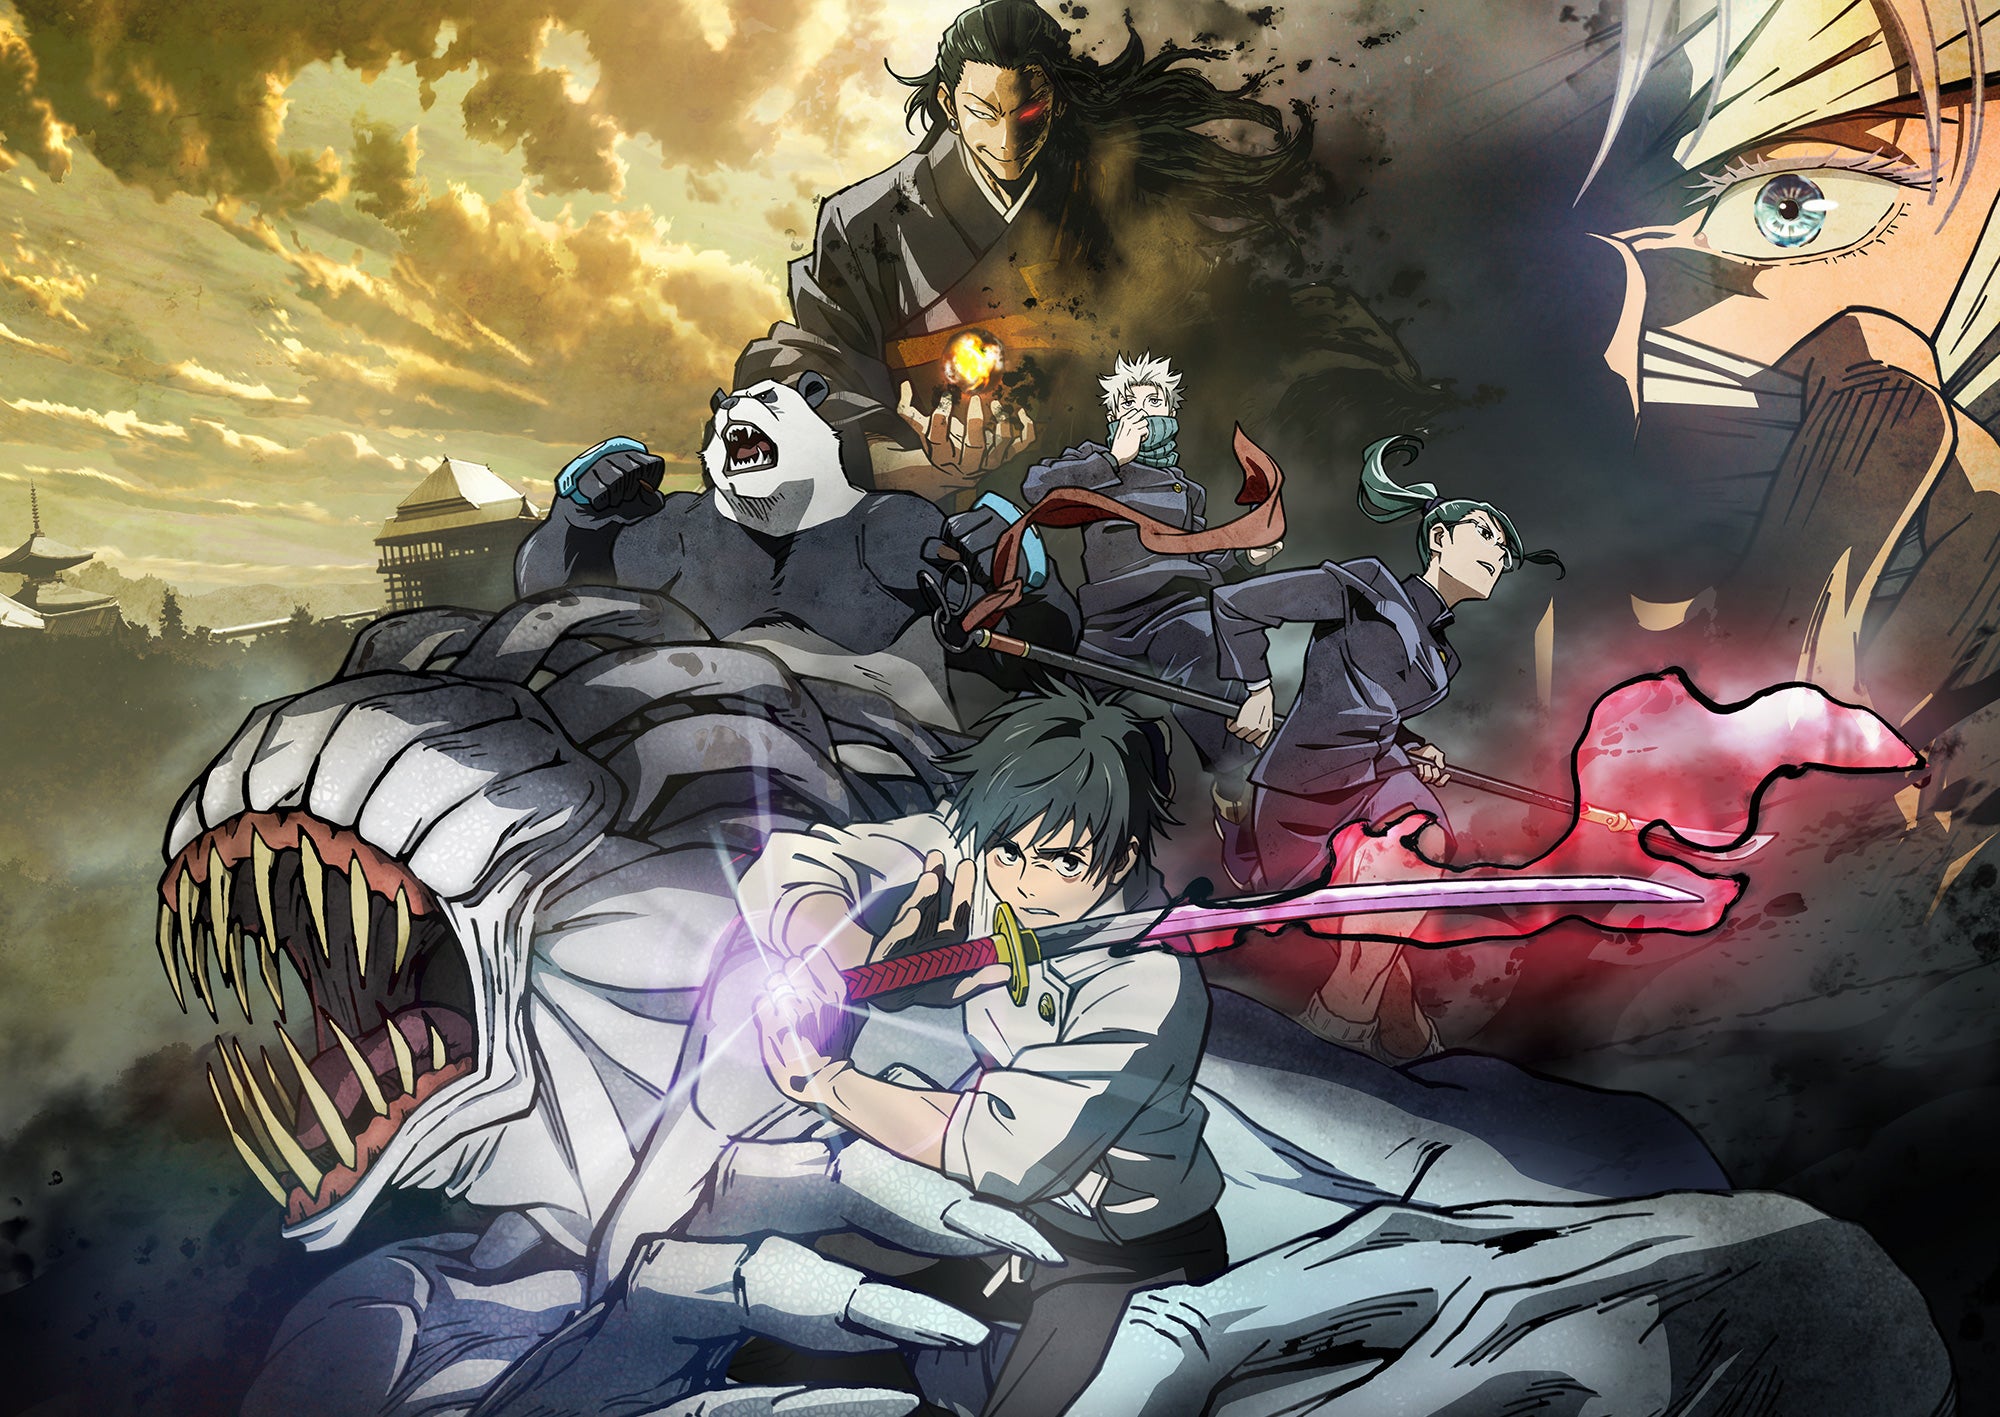 Jujutsu Kiasen 0 Becomes the 7th Highest Grossing Anime Film of All Time